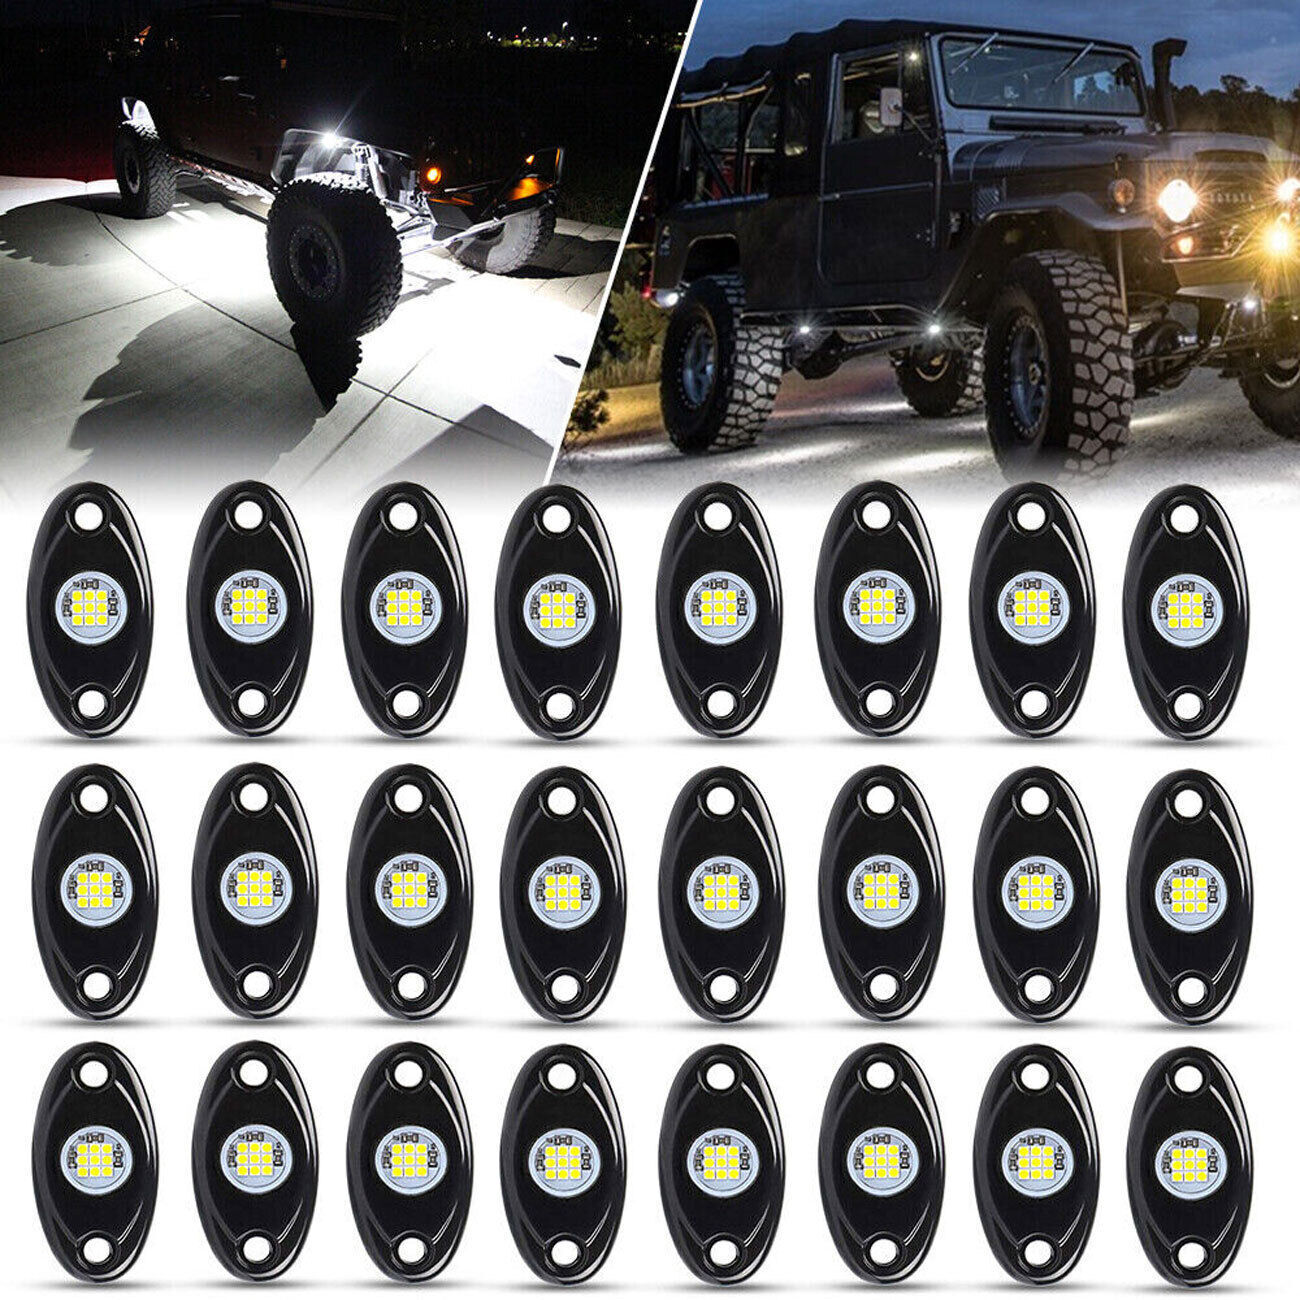 24X White LED Rock Lights Underbody Trail Rig Glow Lamp Offroad SUV Pickup Truck